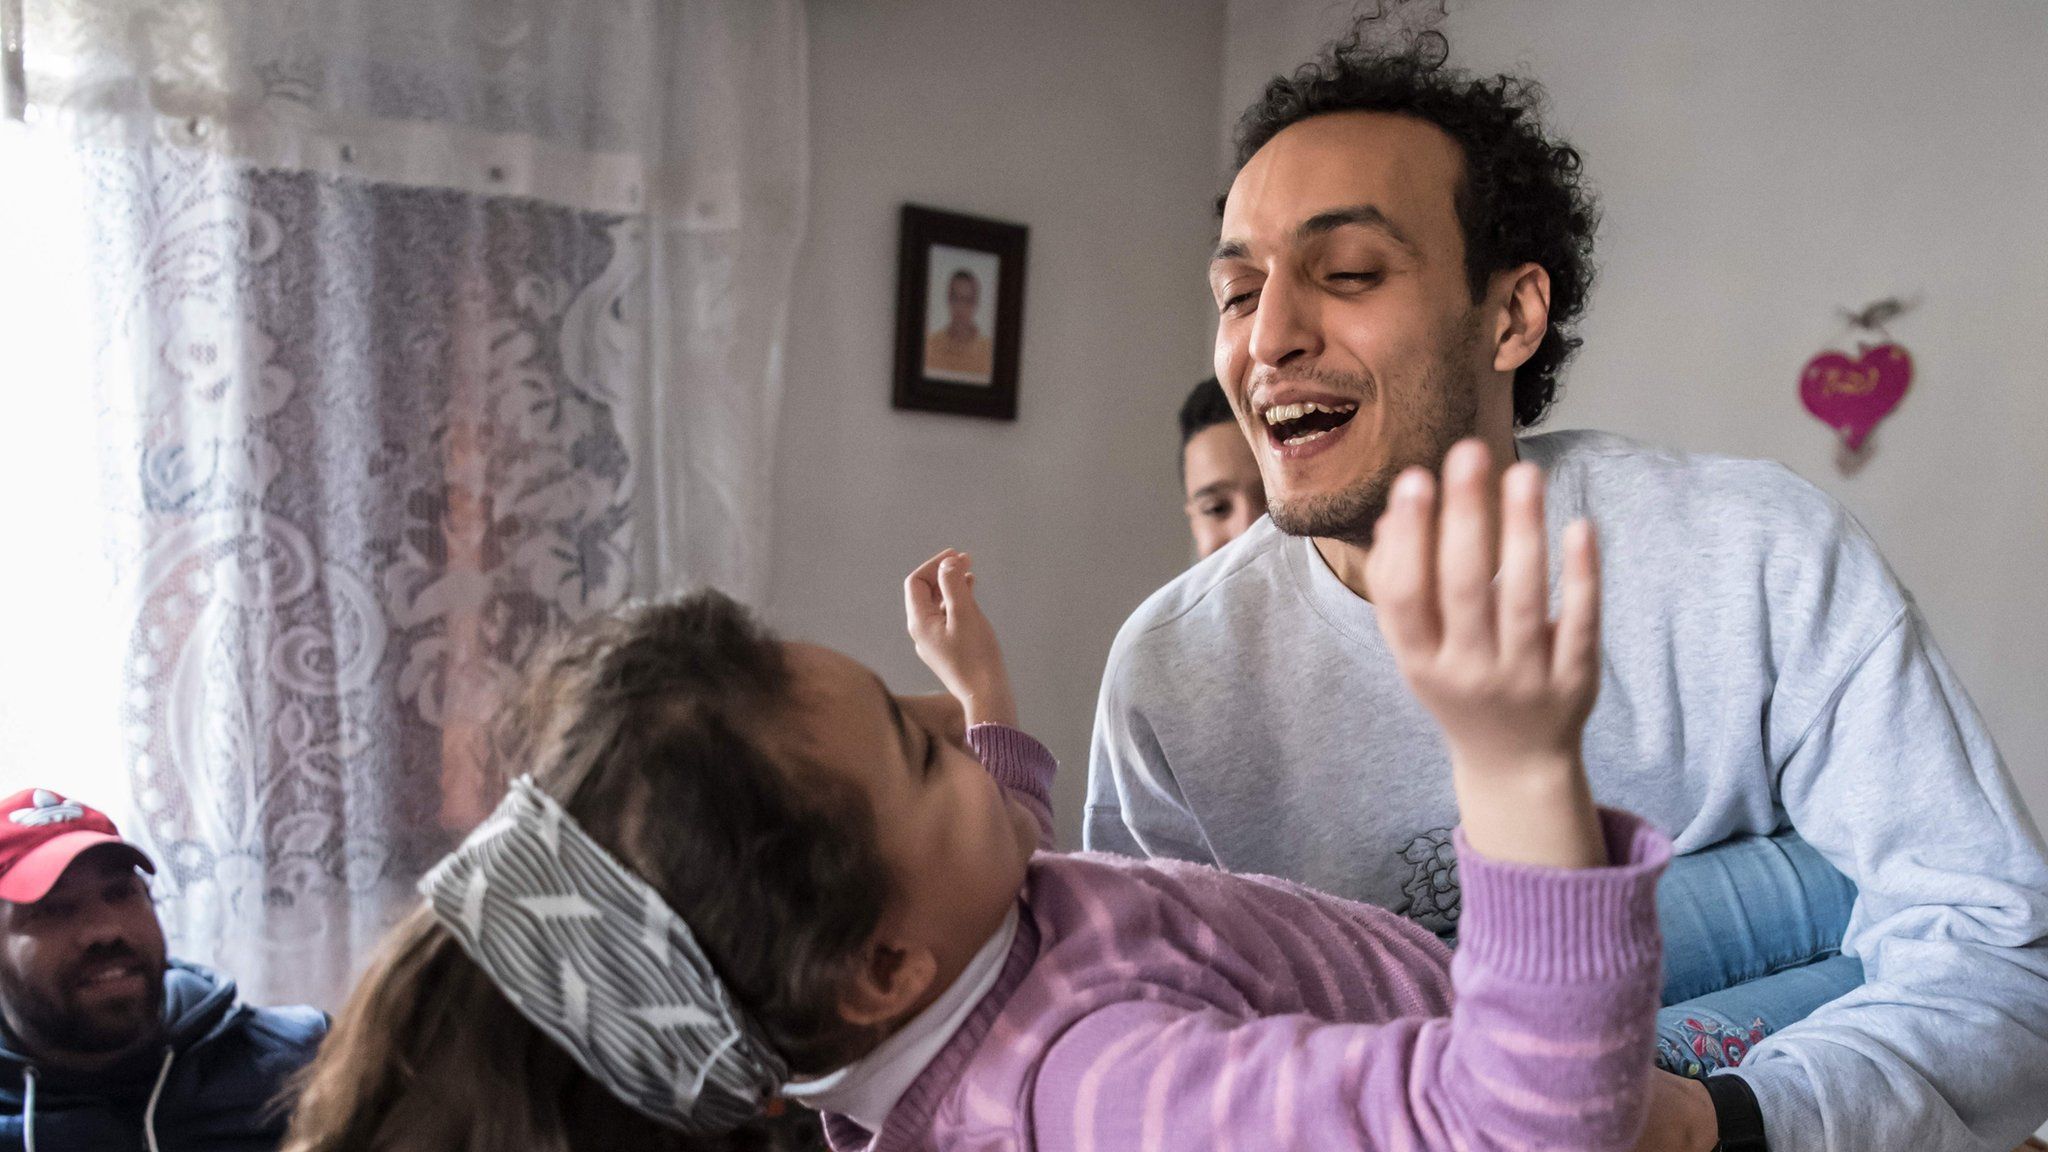 Egyptian photojournalist Mahmoud Abou Zeid, widely known as Shawkan, plays with his niece at his home in Cairo on 4 March 2019